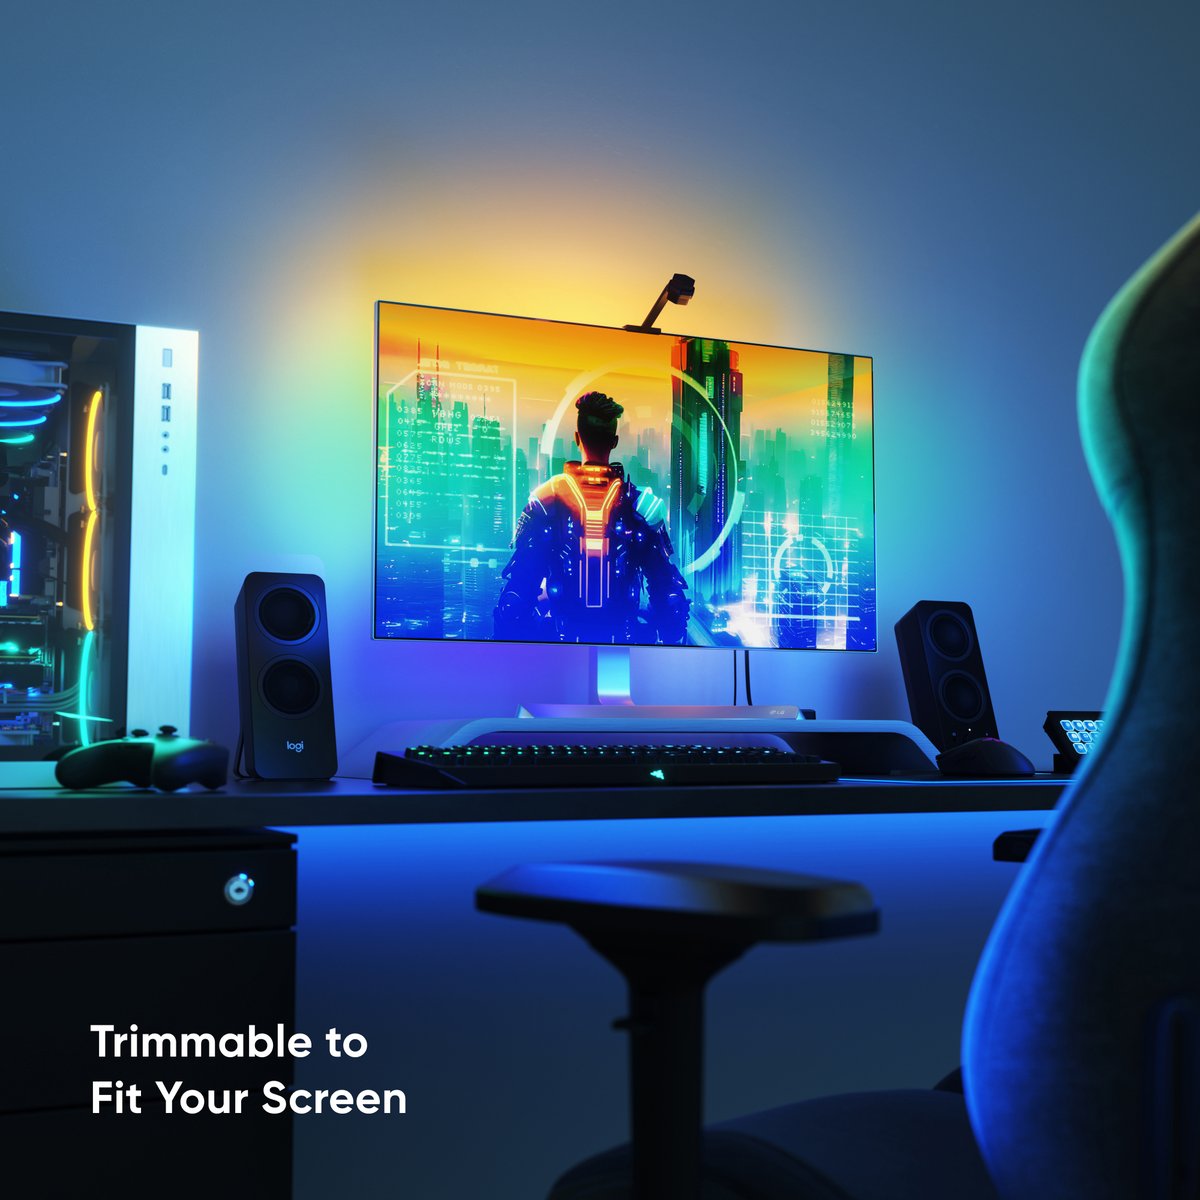 With Nanoleaf 4D, take your entertainment beyond the screen! Illuminate your space with colors from your favorite shows, movies, and video games. 📺 🍿 🎮

🛒 PRE-ORDER NOW: go.nanoleaf.me/4d-sm

#nanoleaf #smartlights #smartlighting #screenmirror #screenmirroring